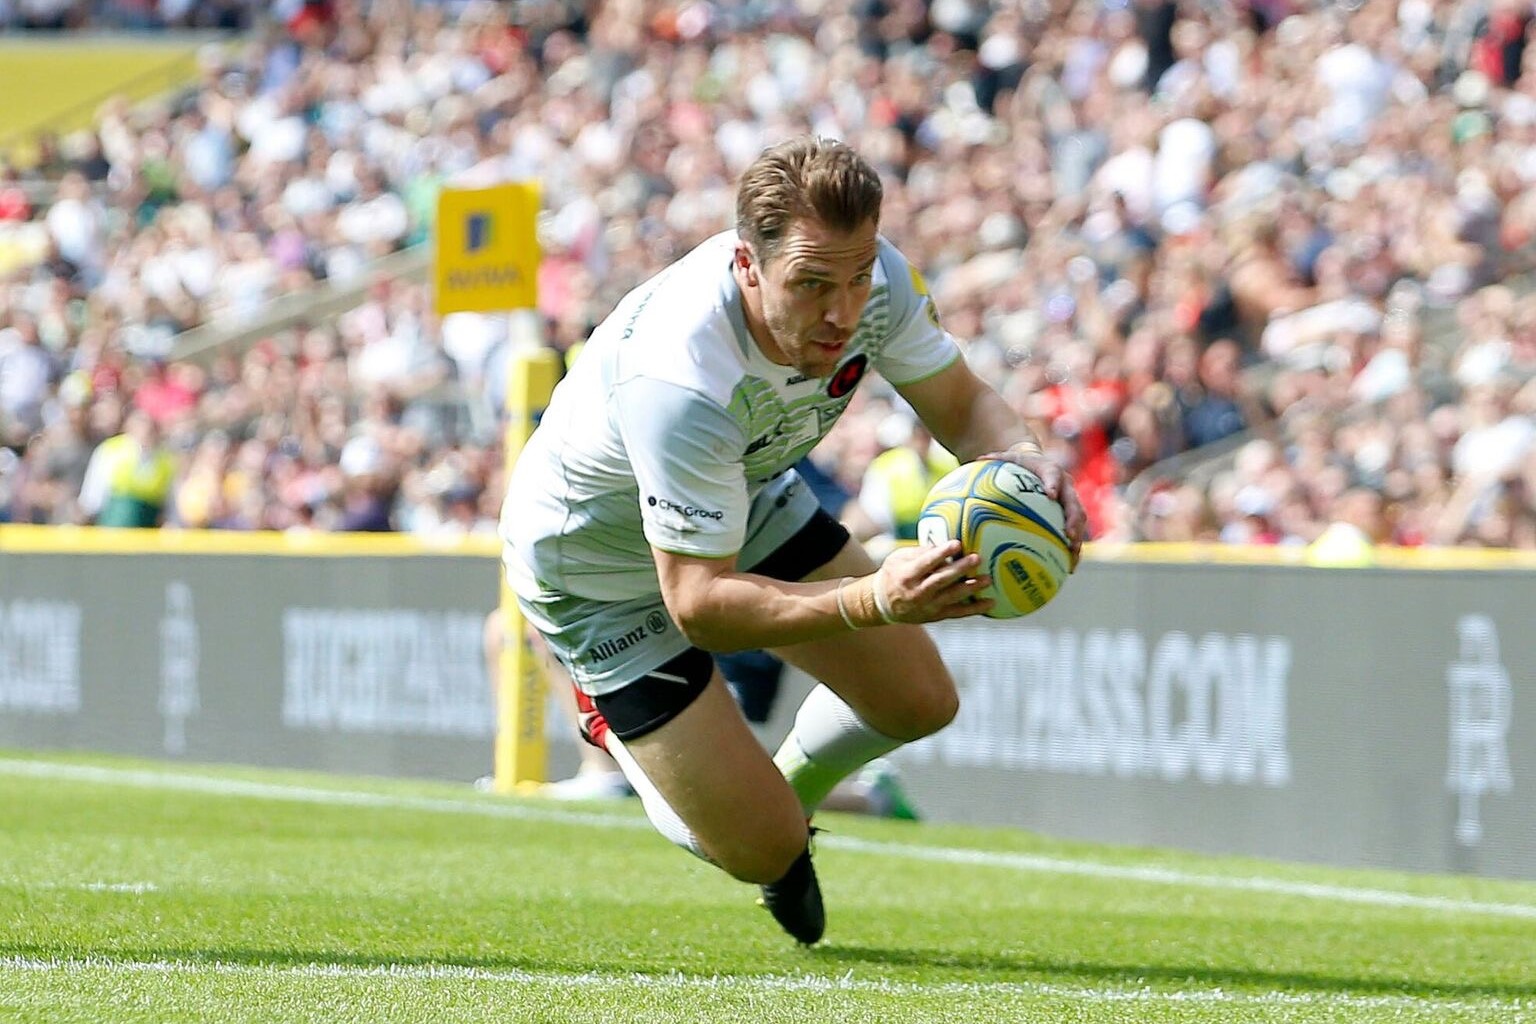 Chris scoring a try for Saracens during the Premiership Final